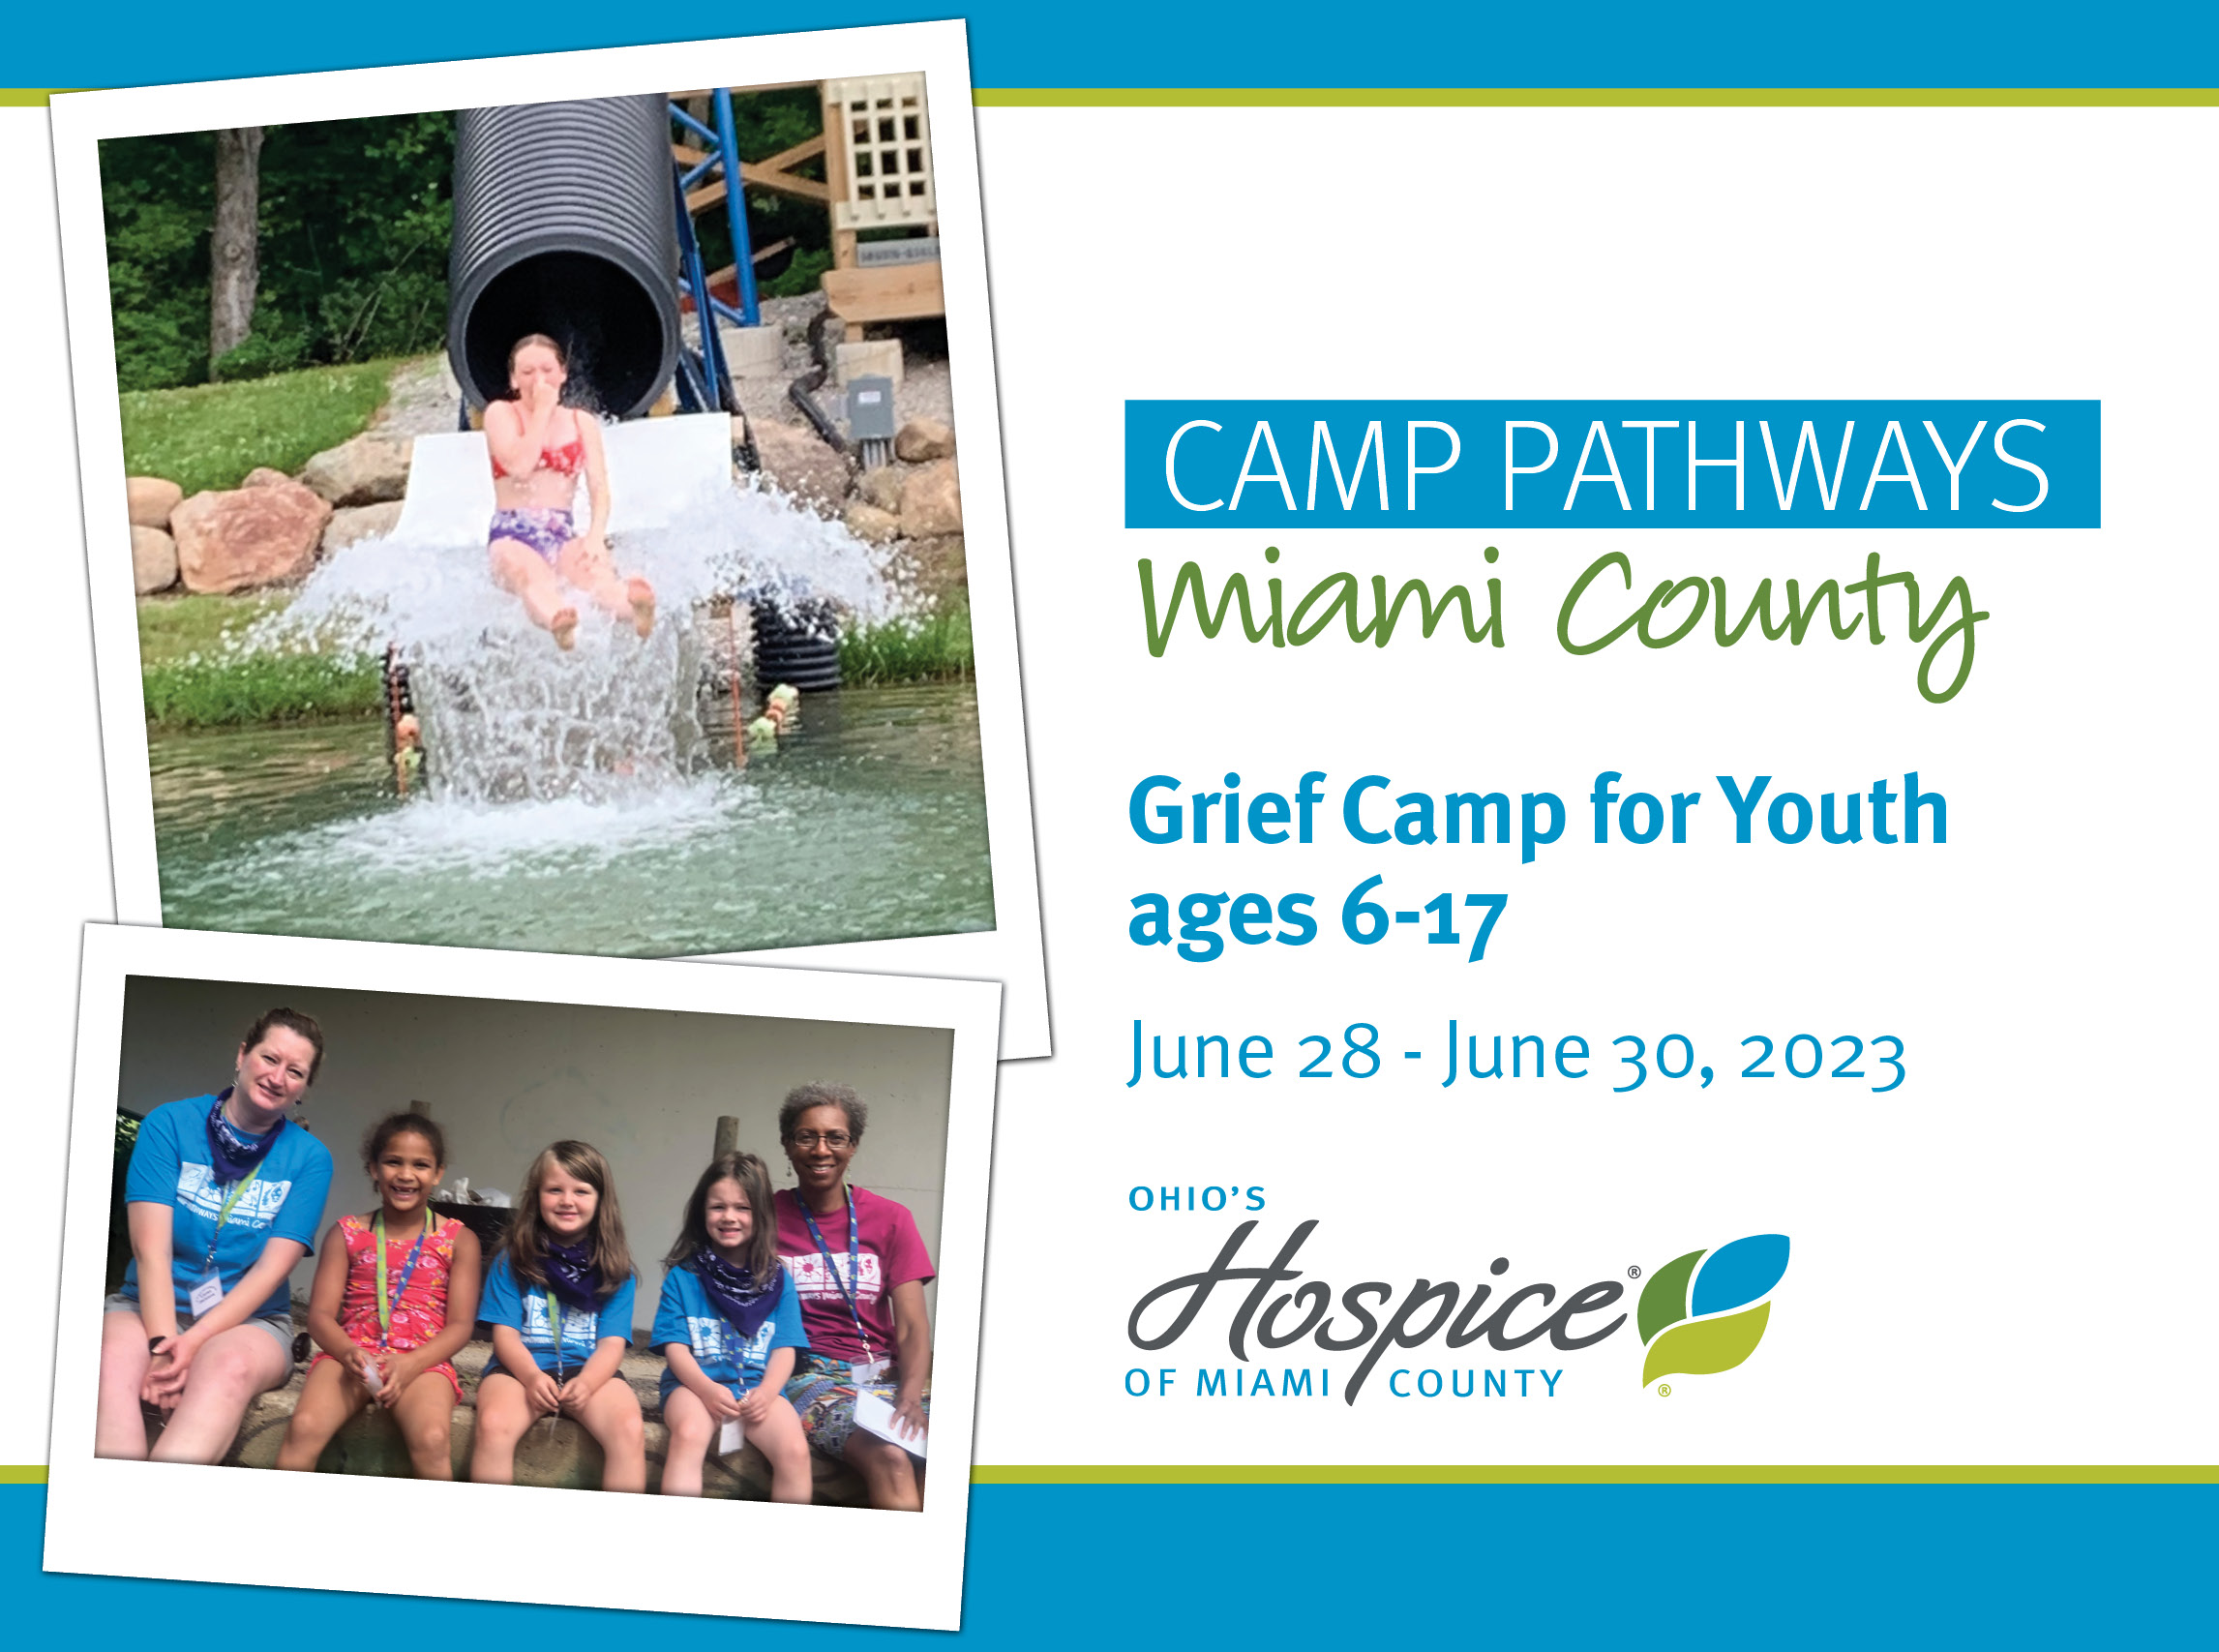 Camp Pathways Miami County. Grief Camp for Youth ages 6-17. June 28 - June 30, 2023. Ohio's Hospice of Miami County.